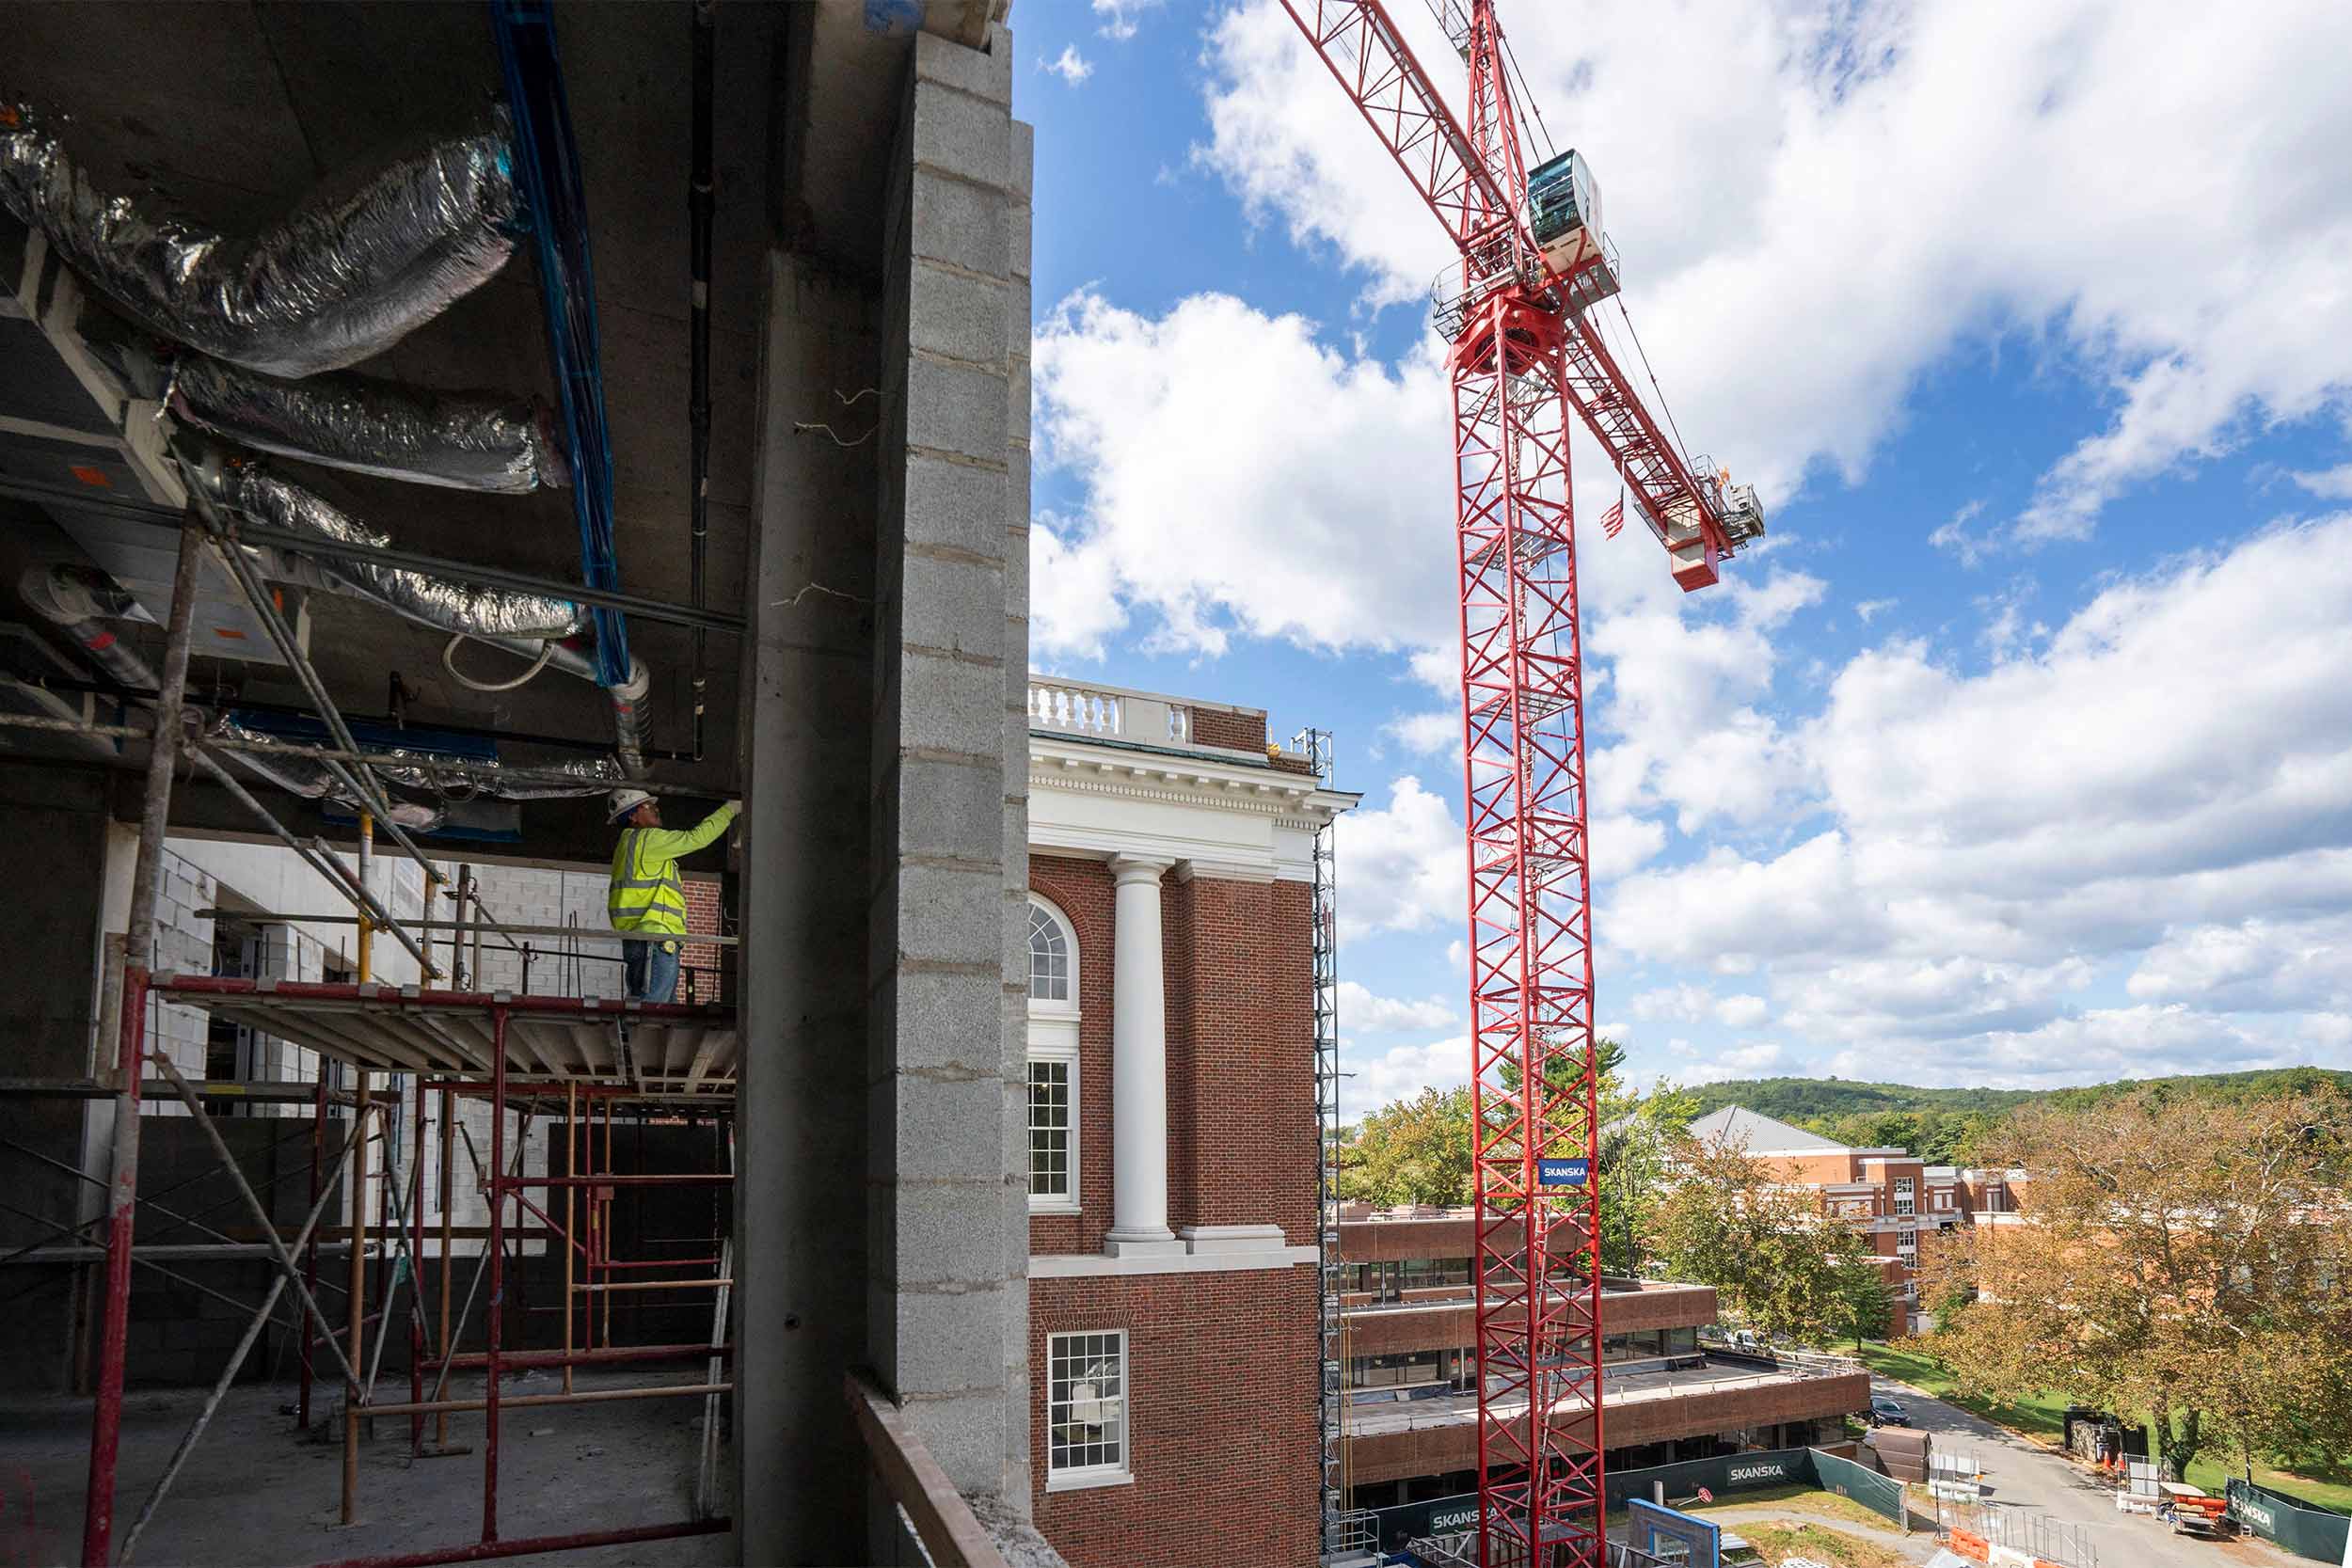 Construction crews working on the inside of Alderman library while a crane sits high outside